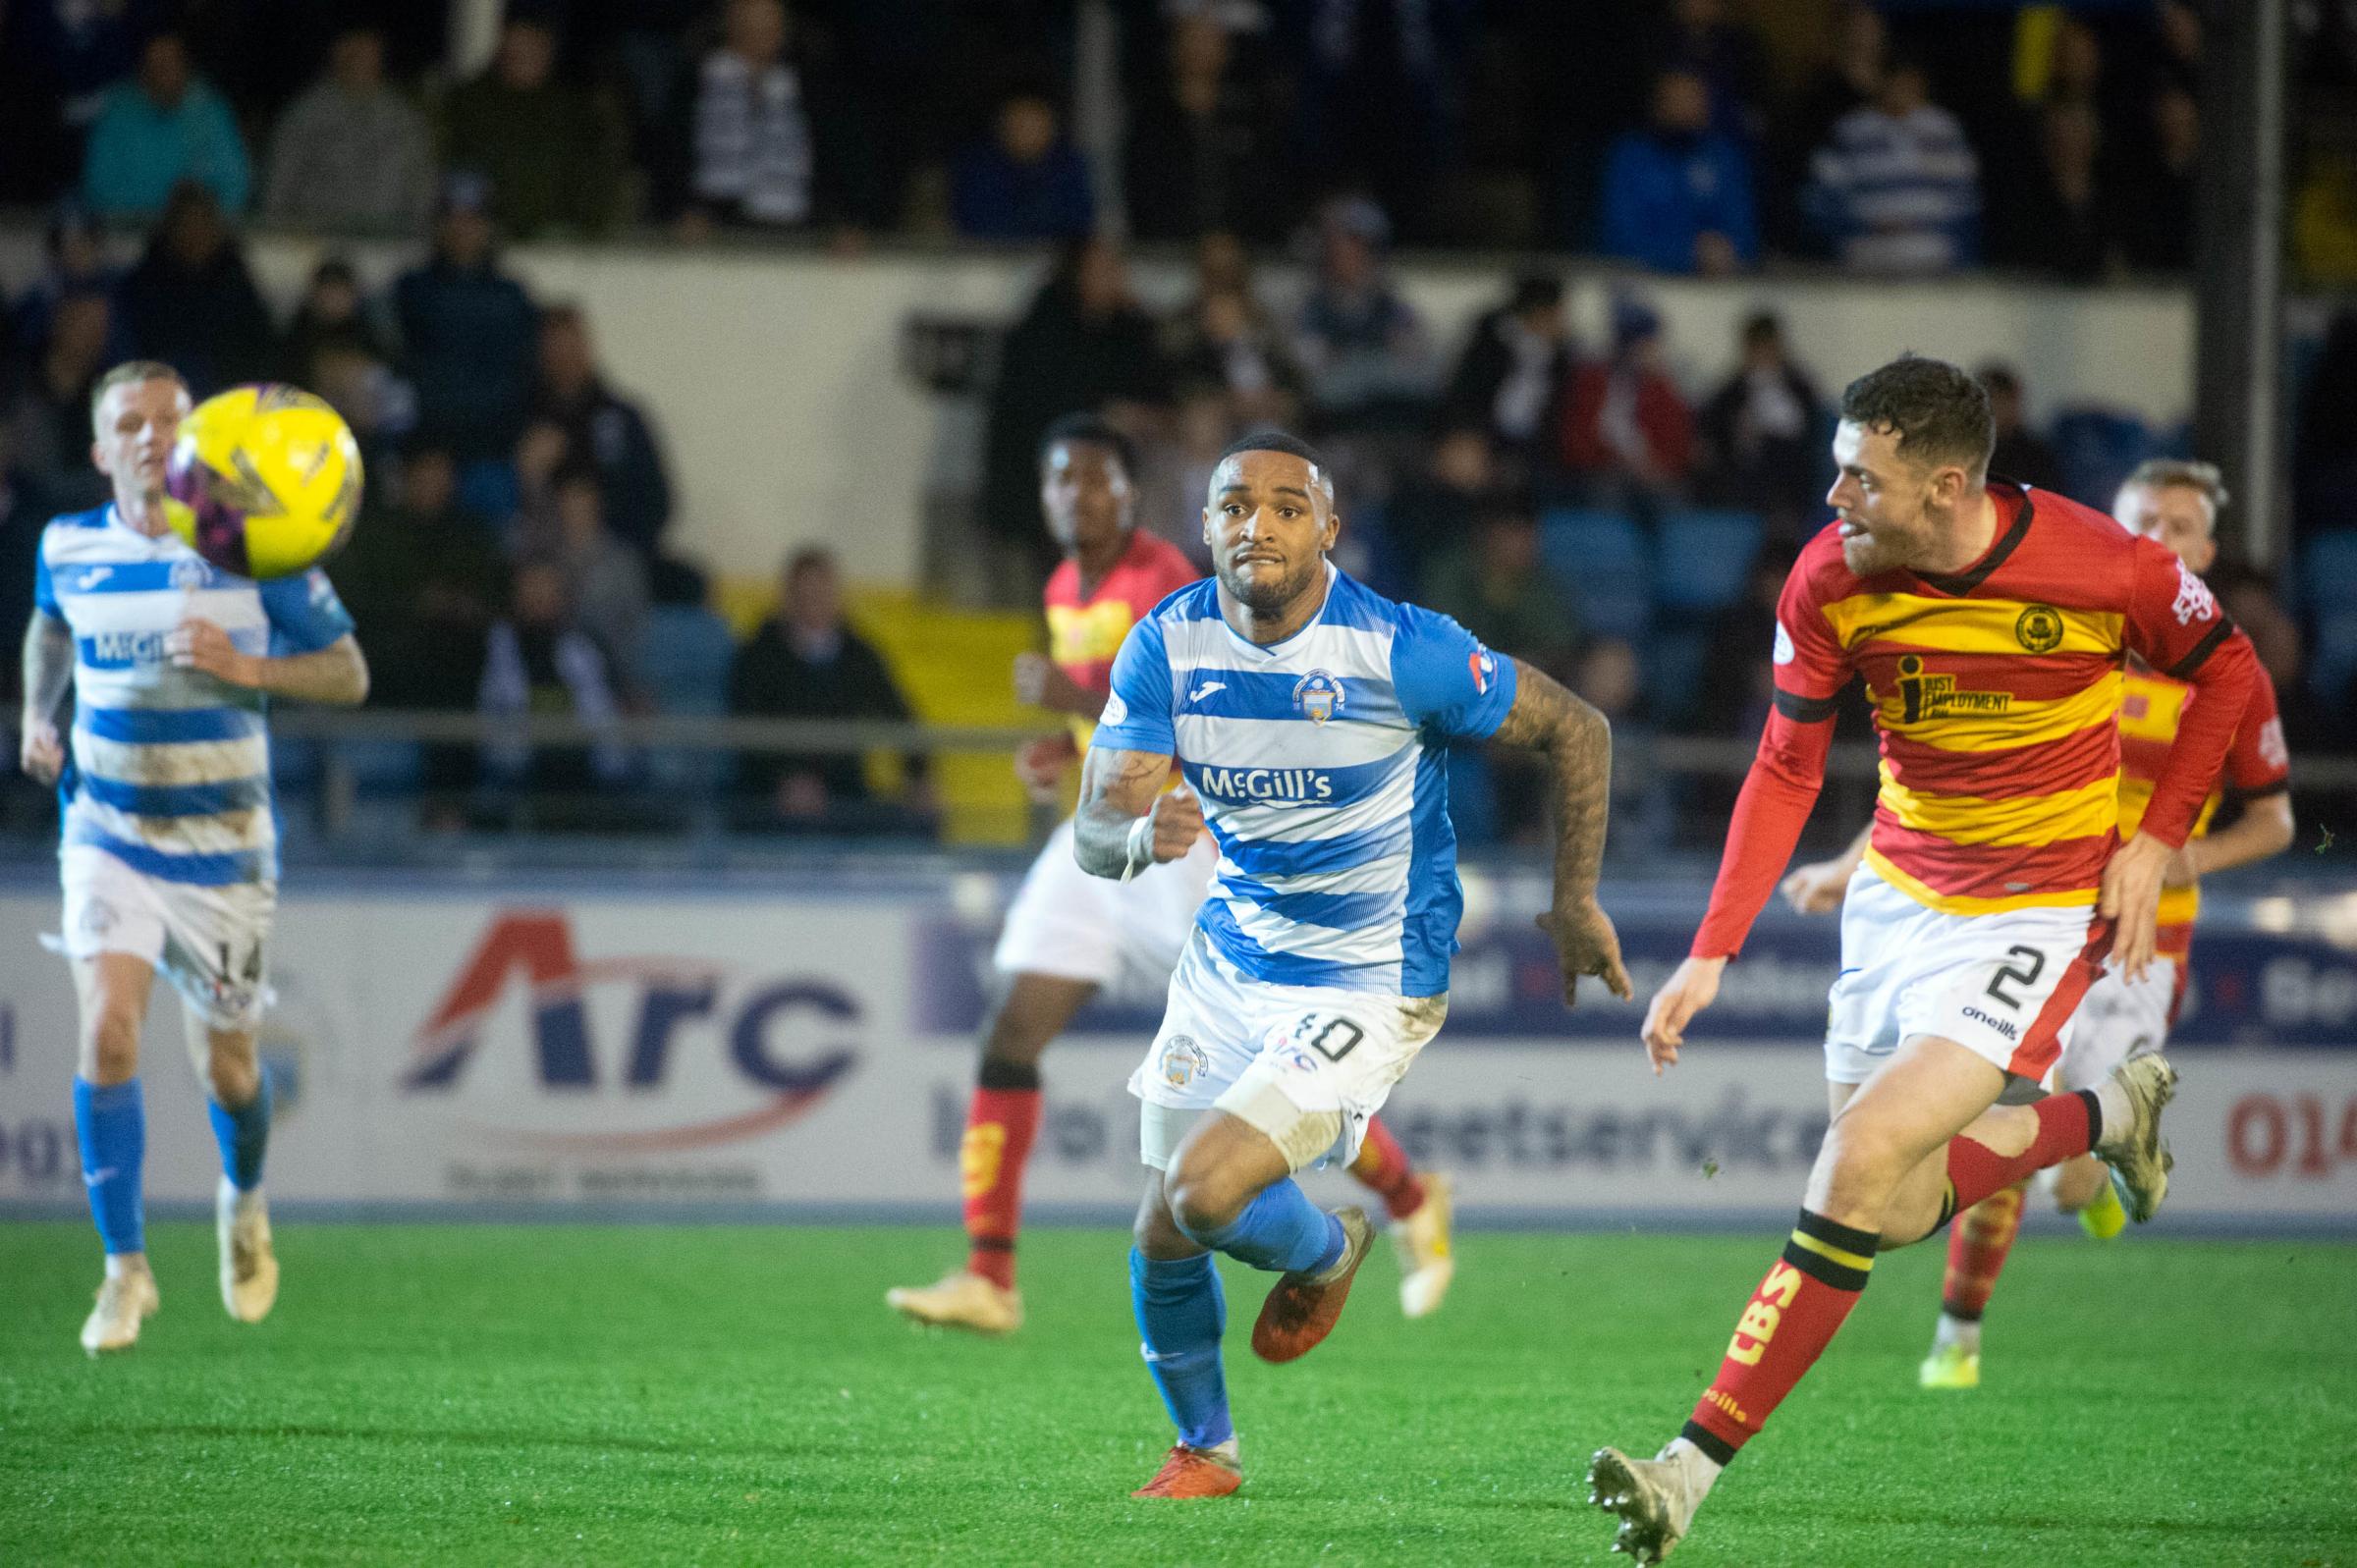 Morton striker Quitongo: 'We are due a win against Ayr'